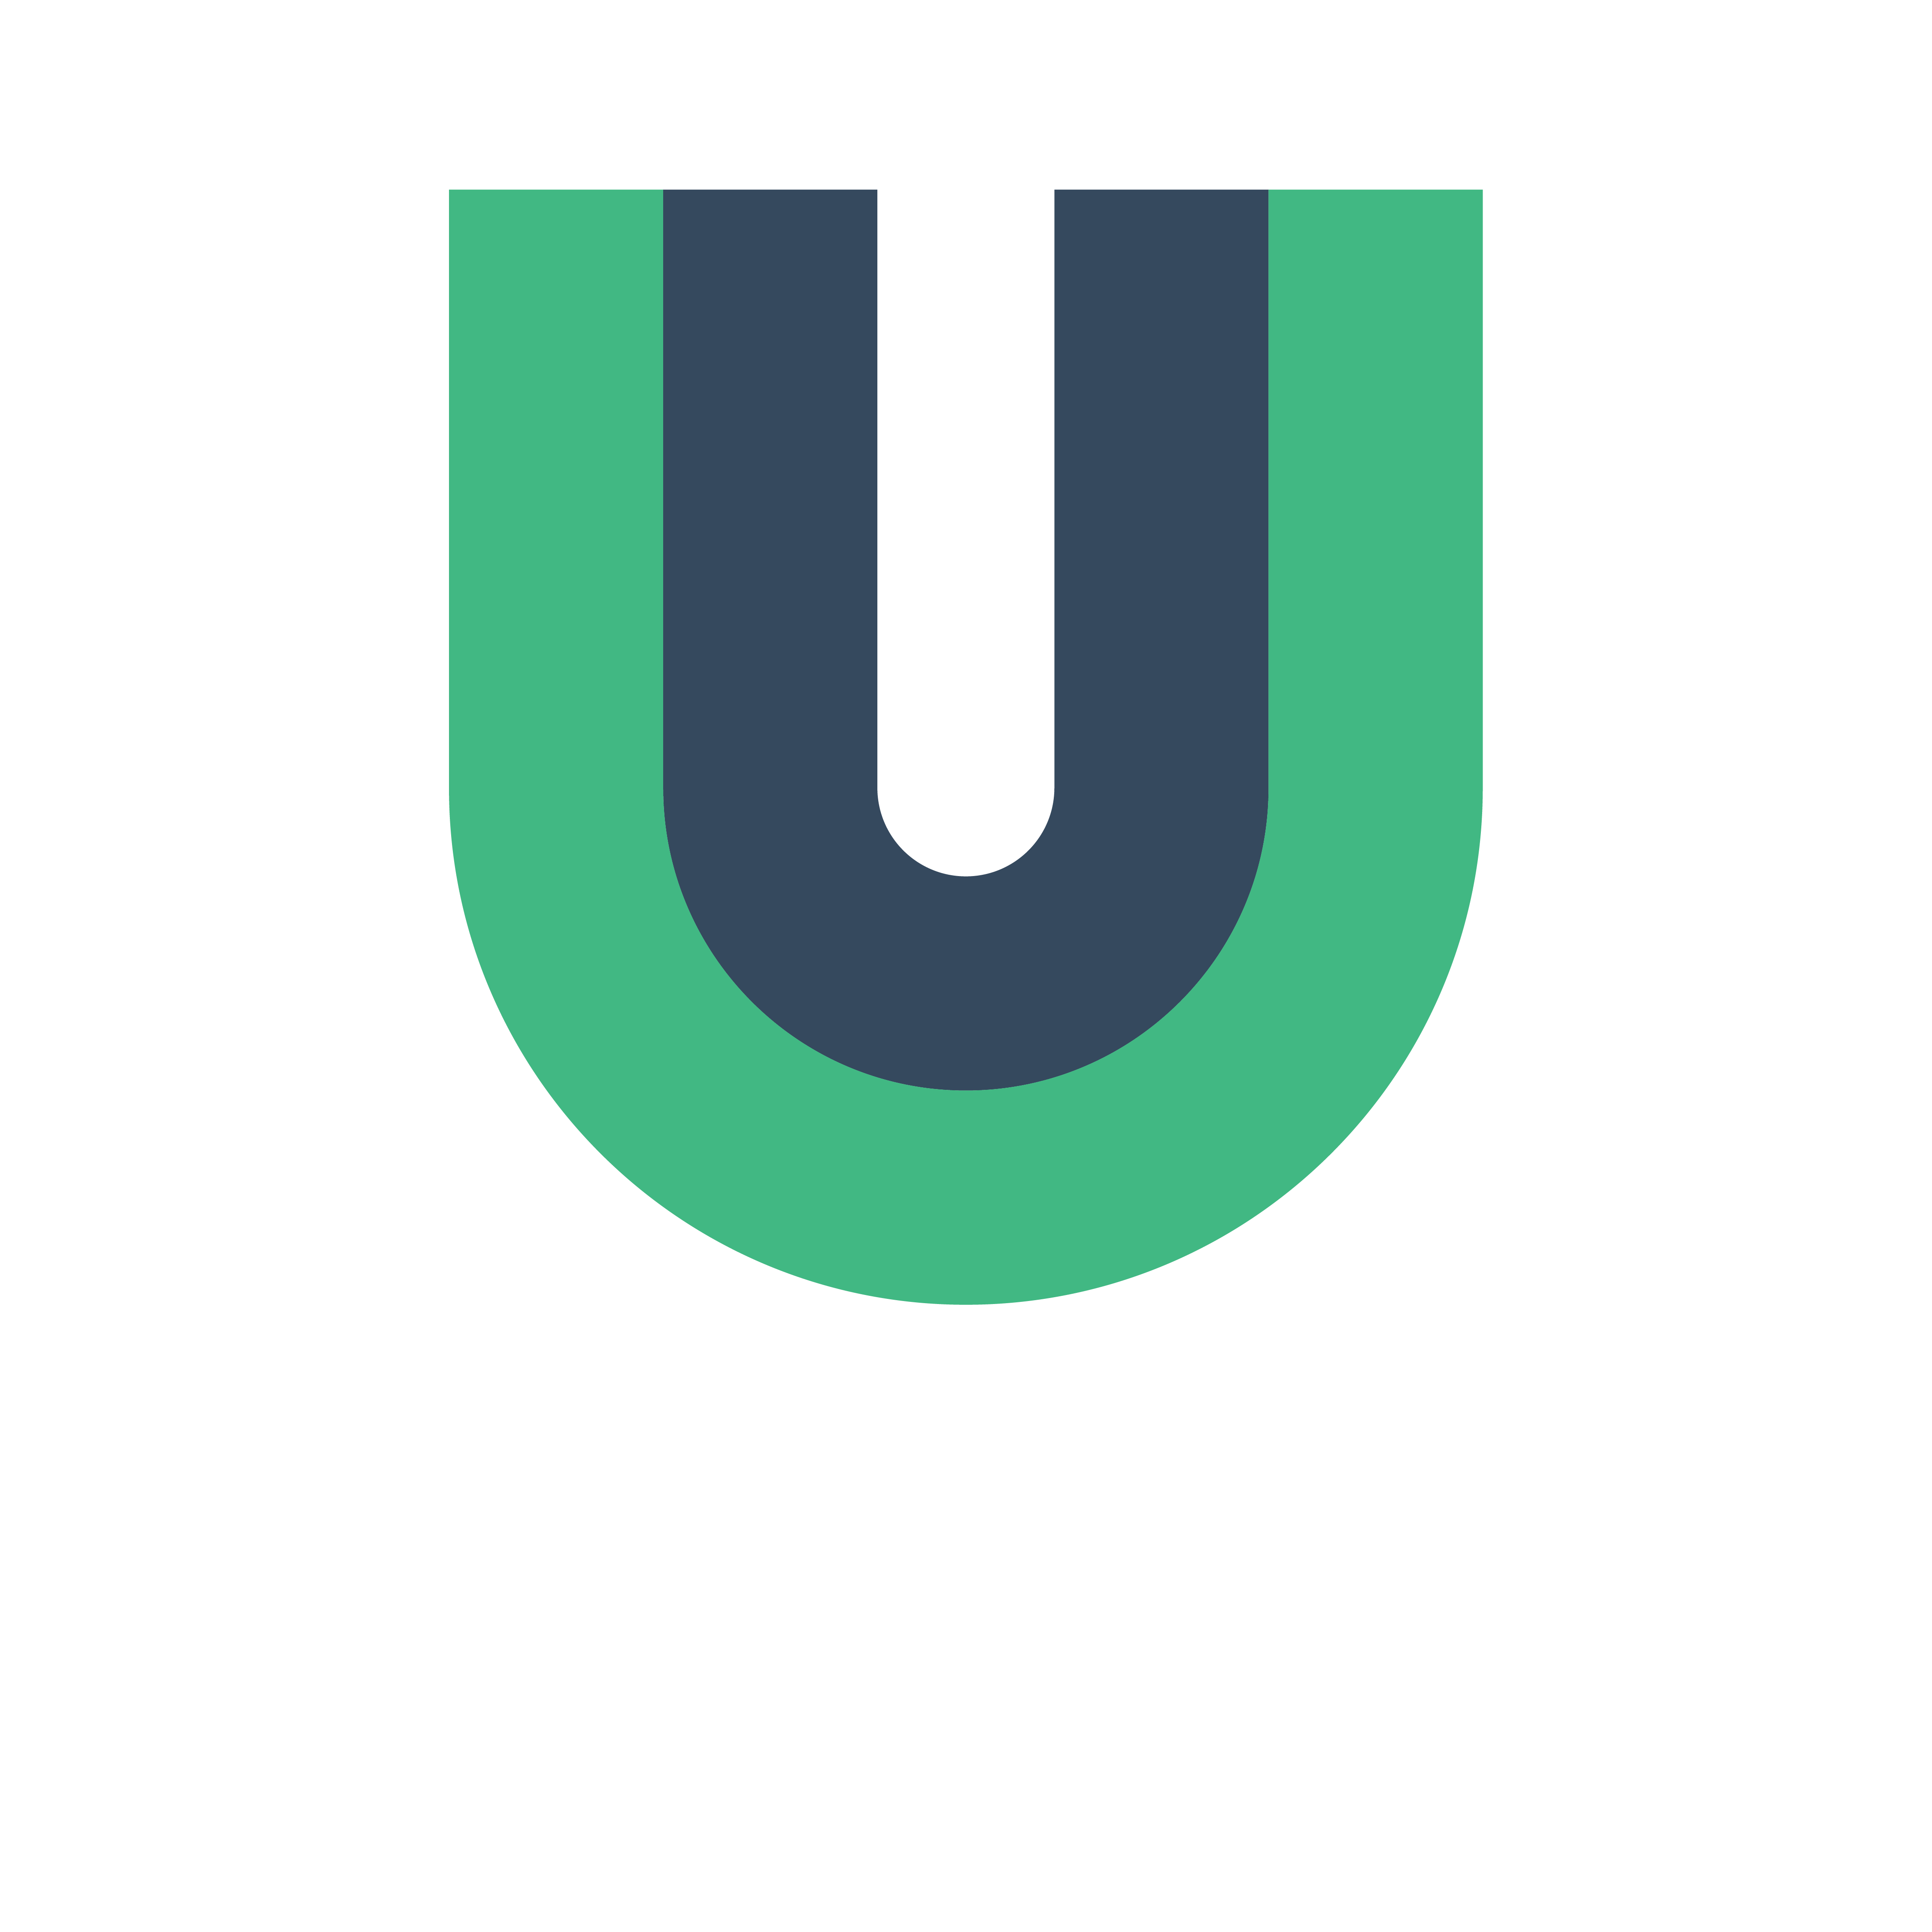 VueUse - Collection of essential Vue Composition Utilities